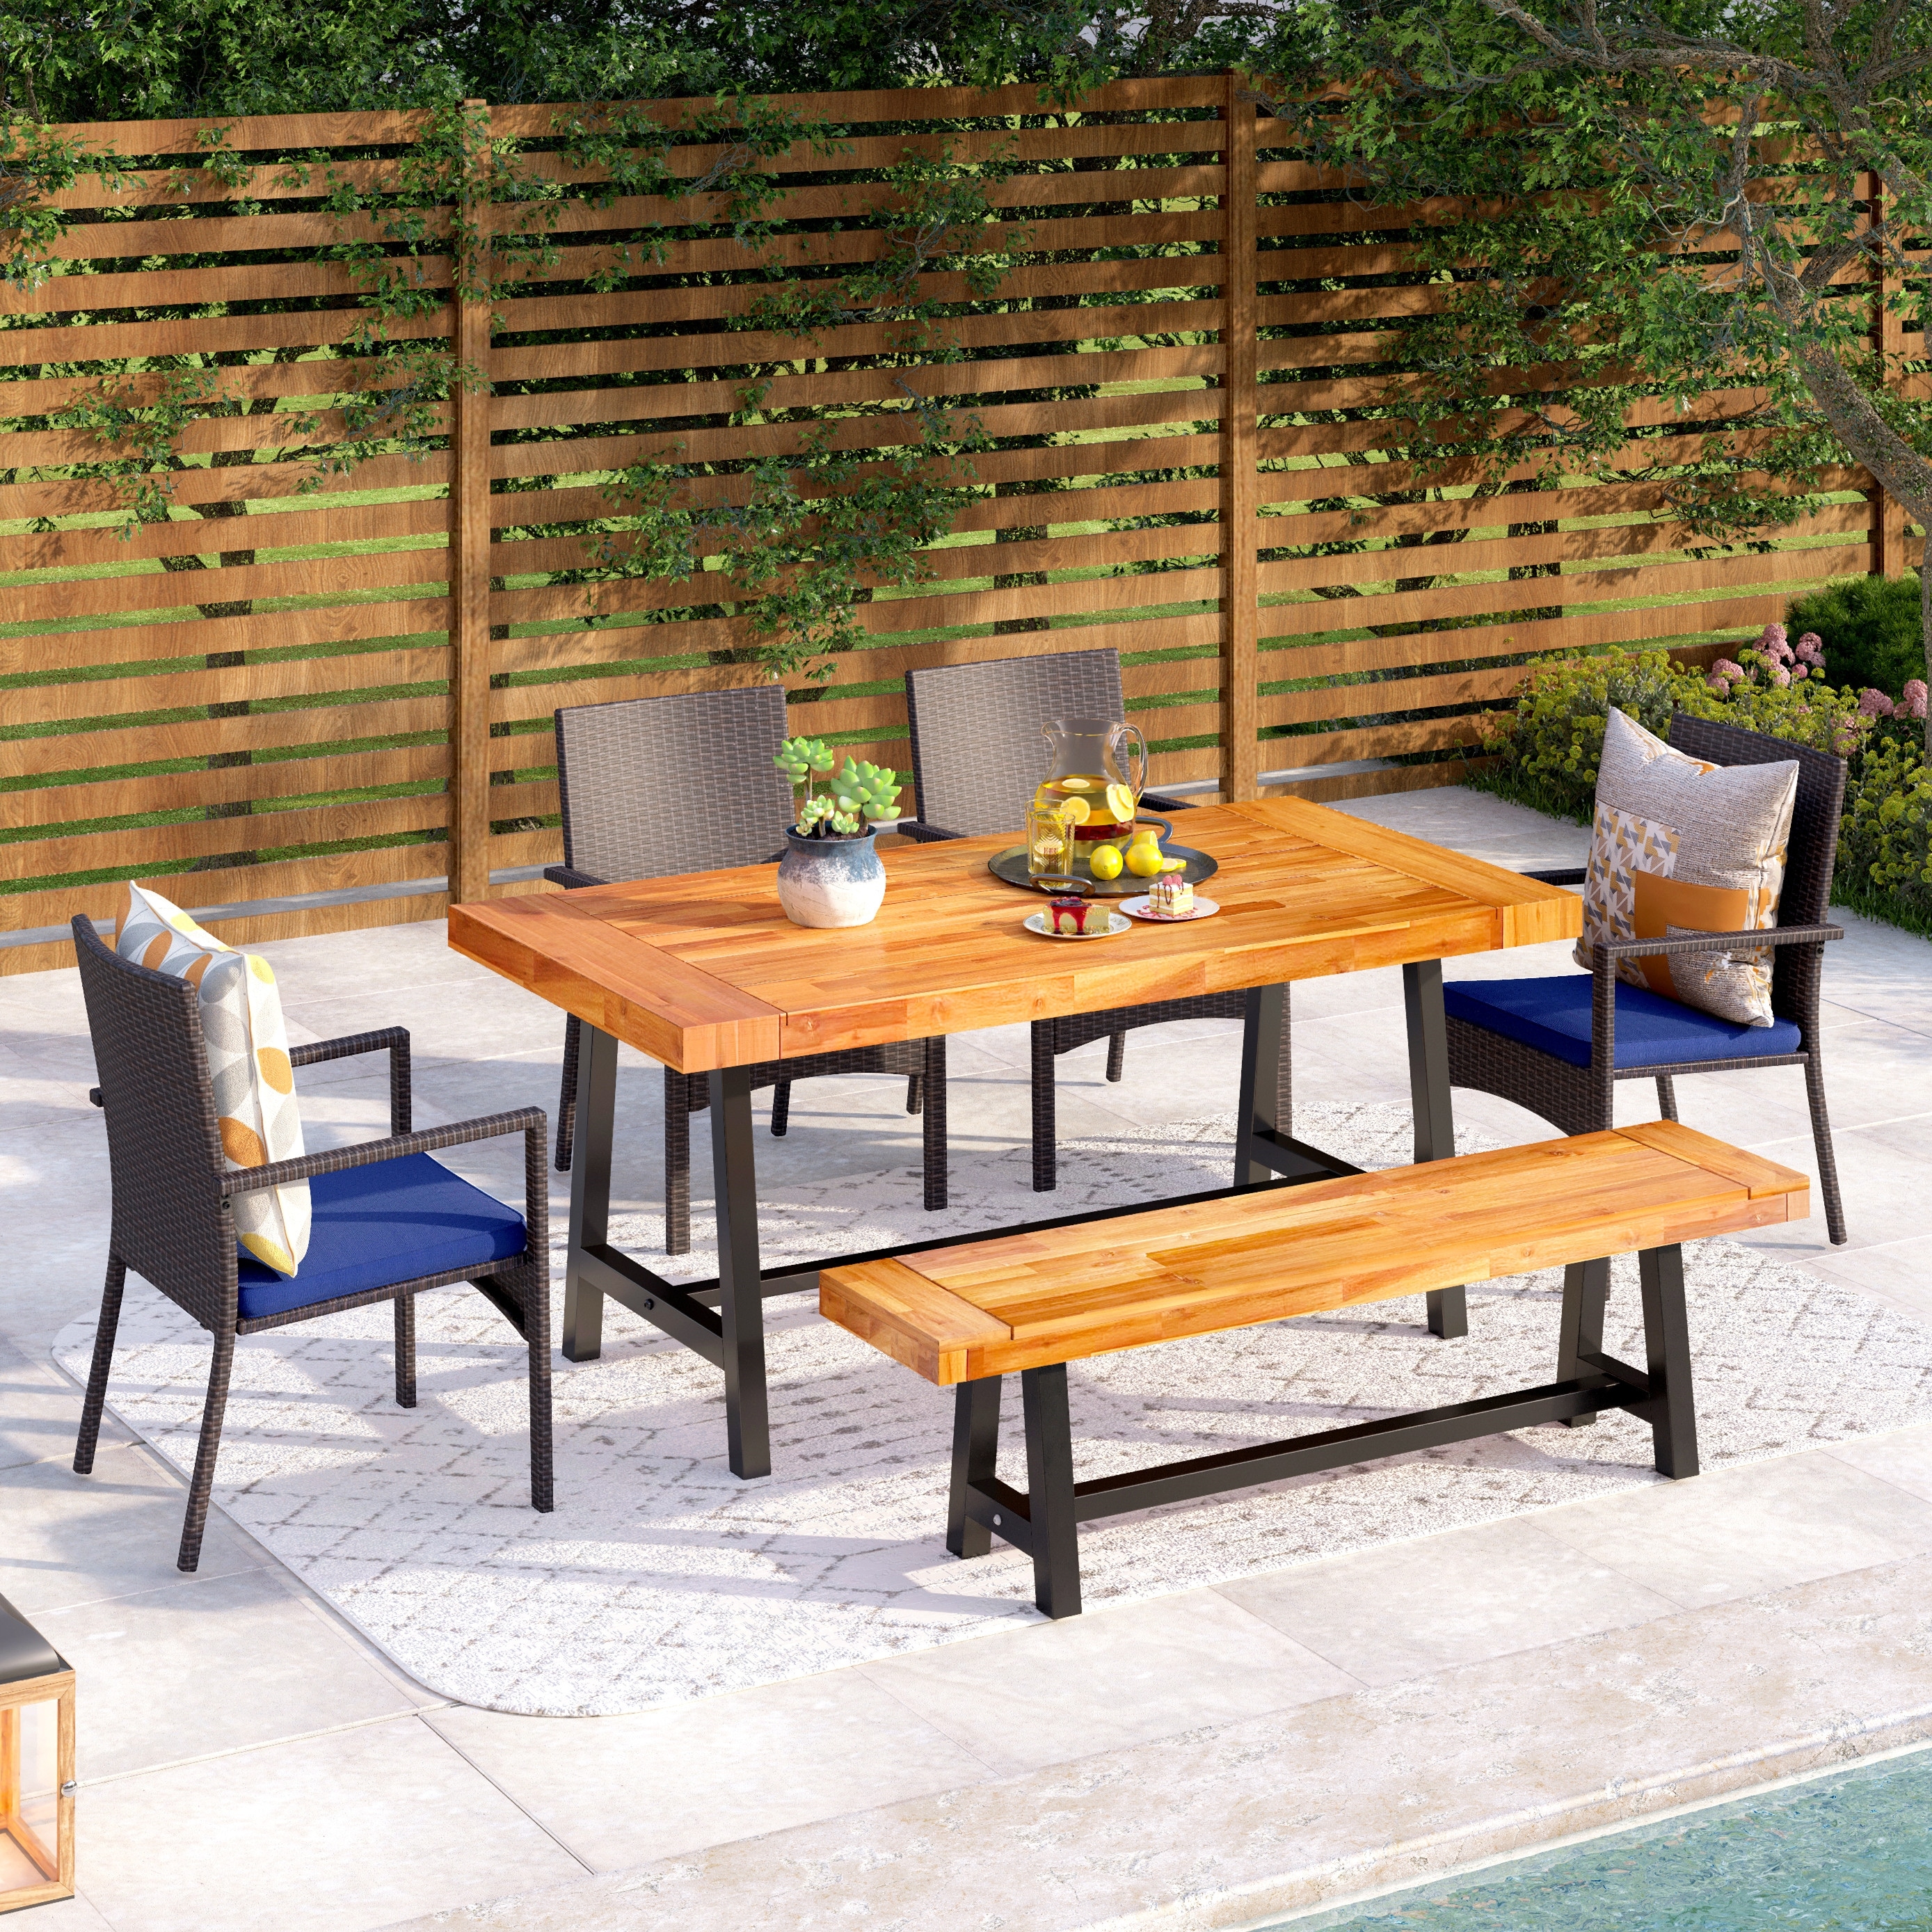 6 Piece Outdoor Patio Dining Set 1 Acacia Wood Table and 4 Cushioned Rattan Chairs